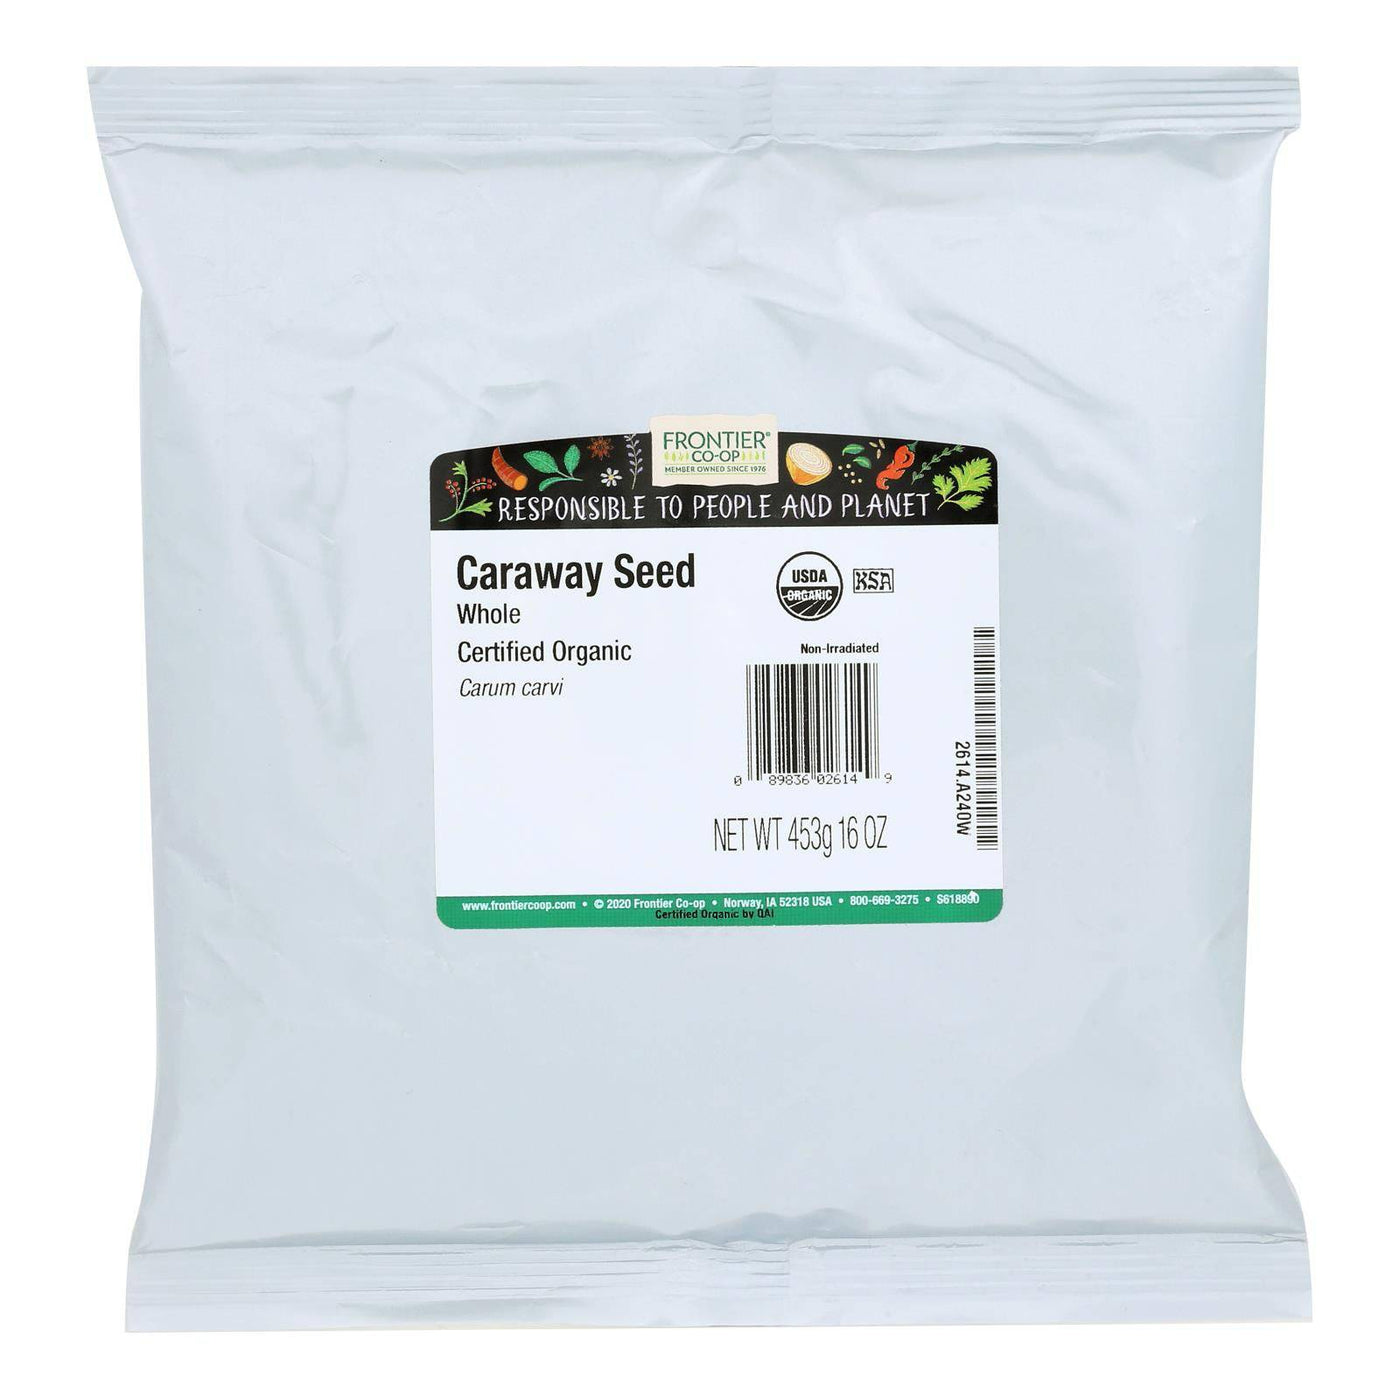 Frontier Herb Caraway Seed Organic Whole - Single Bulk Item - 1lb | OnlyNaturals.us